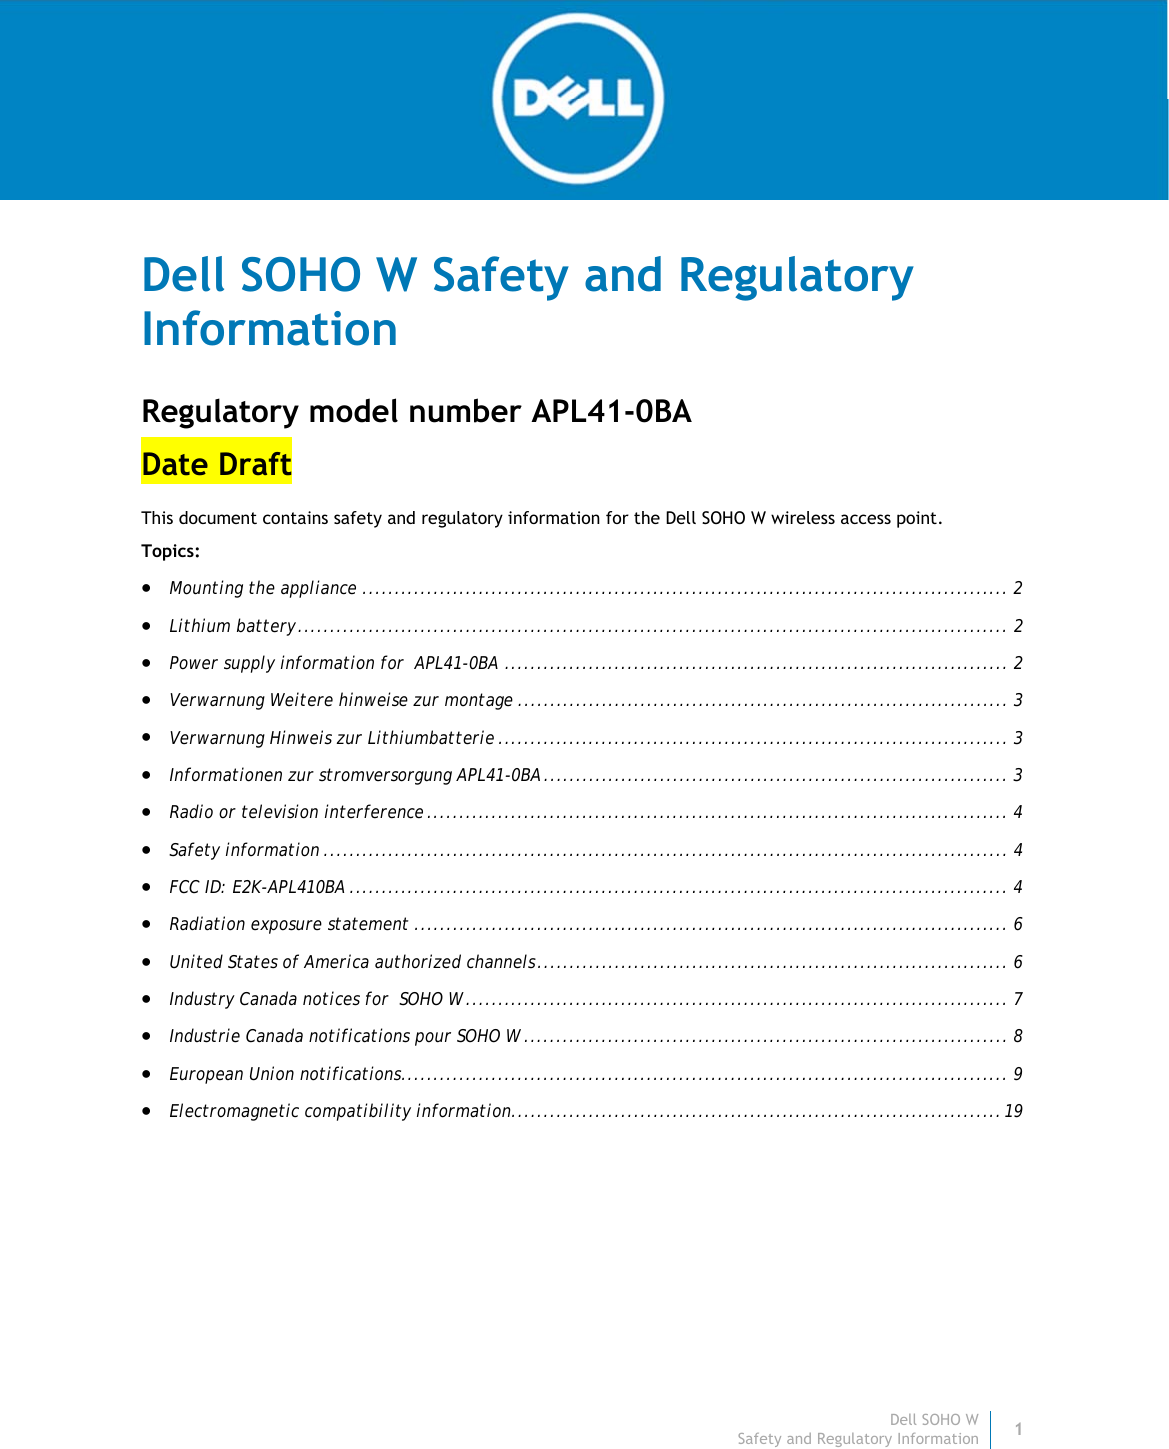 Dell SOHO W1 Safety and Regulatory Information    Dell SOHO W Safety and Regulatory Information Regulatory model number APL41-0BA Date Draft This document contains safety and regulatory information for the Dell SOHO W wireless access point.  Topics:   Mounting the appliance .................................................................................................... 2 Lithium battery .............................................................................................................. 2 Power supply information for  APL41-0BA .............................................................................. 2 Verwarnung Weitere hinweise zur montage ............................................................................ 3 Verwarnung Hinweis zur Lithiumbatterie ............................................................................... 3 Informationen zur stromversorgung APL41-0BA ........................................................................ 3 Radio or television interference .......................................................................................... 4 Safety information .......................................................................................................... 4 FCC ID: E2K-APL410BA ...................................................................................................... 4 Radiation exposure statement ............................................................................................ 6 United States of America authorized channels ......................................................................... 6 Industry Canada notices for  SOHO W .................................................................................... 7 Industrie Canada notifications pour SOHO W ........................................................................... 8 European Union notifications .............................................................................................. 9 Electromagnetic compatibility information............................................................................ 19    